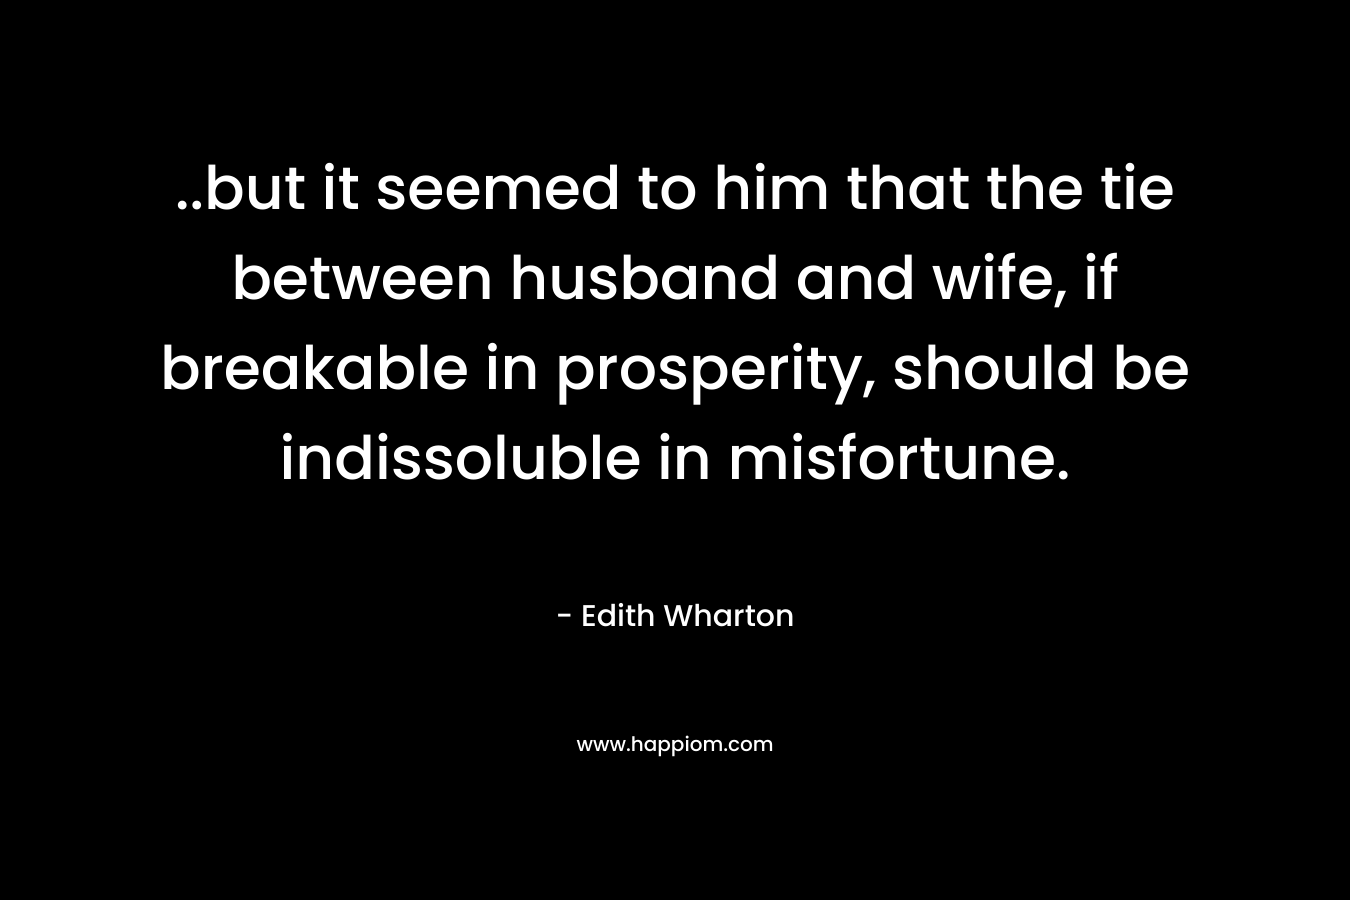 ..but it seemed to him that the tie between husband and wife, if breakable in prosperity, should be indissoluble in misfortune. – Edith Wharton